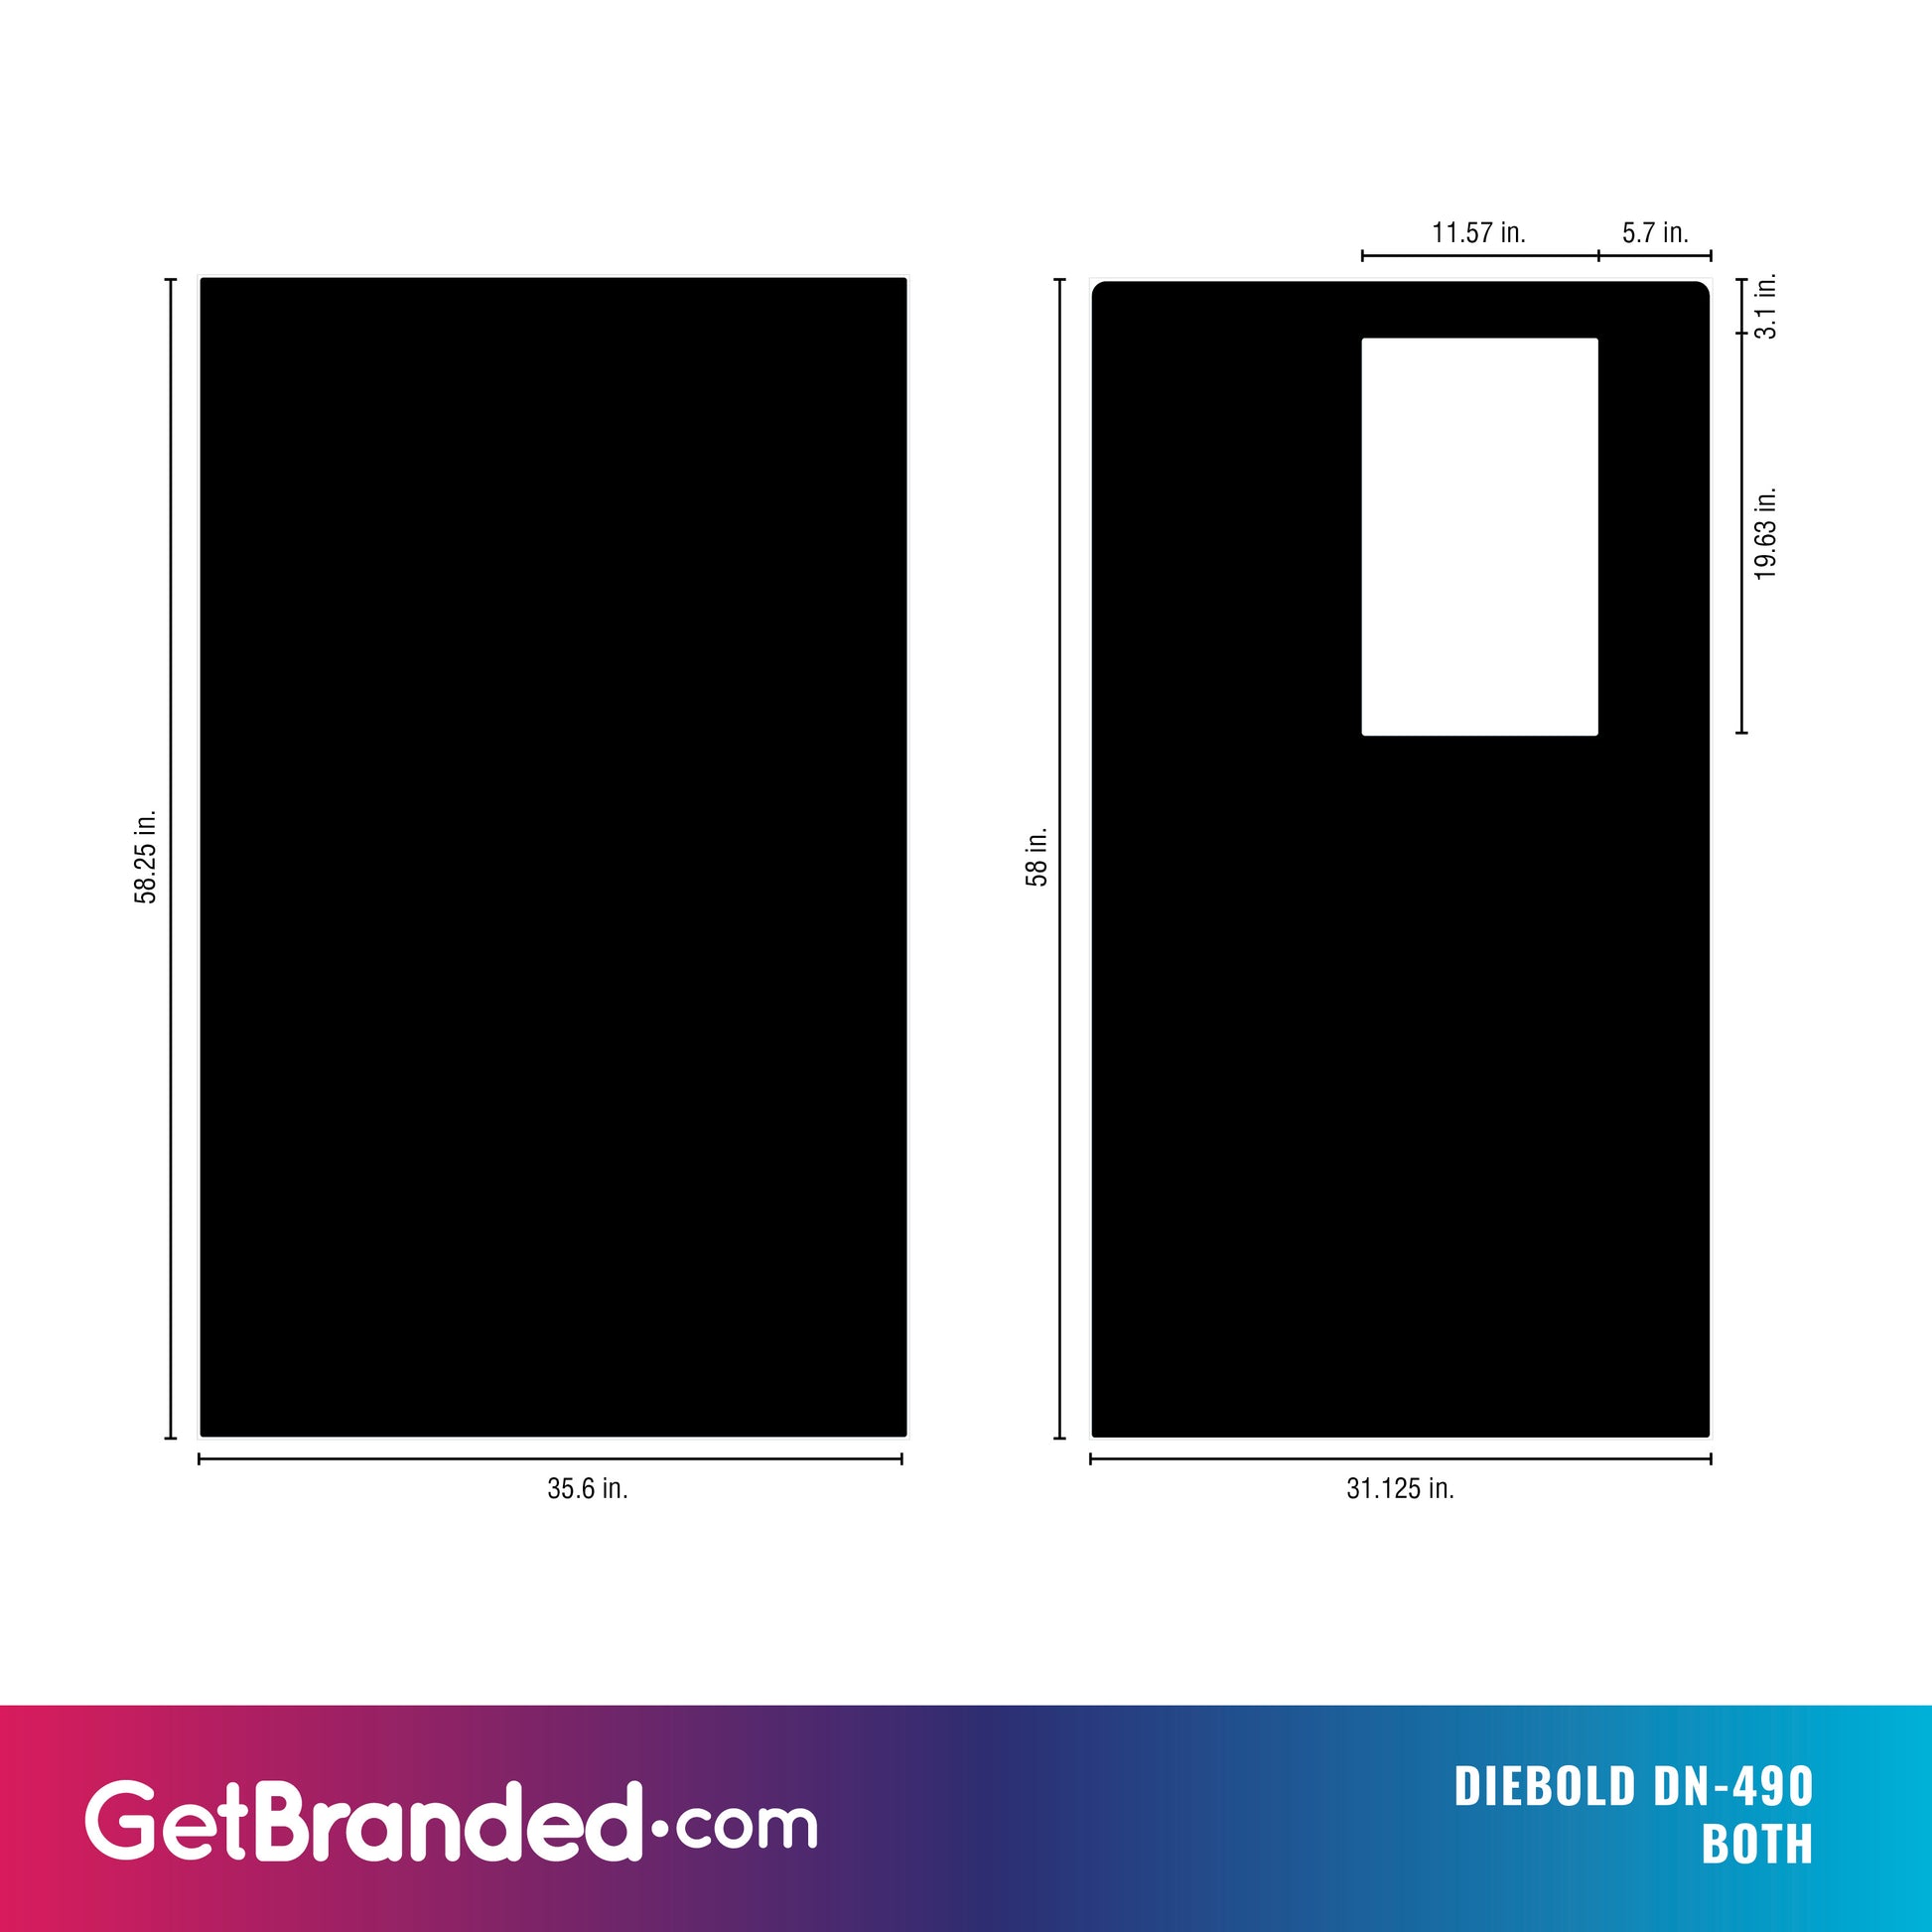 Diebold DN-490 both side panels dimensions